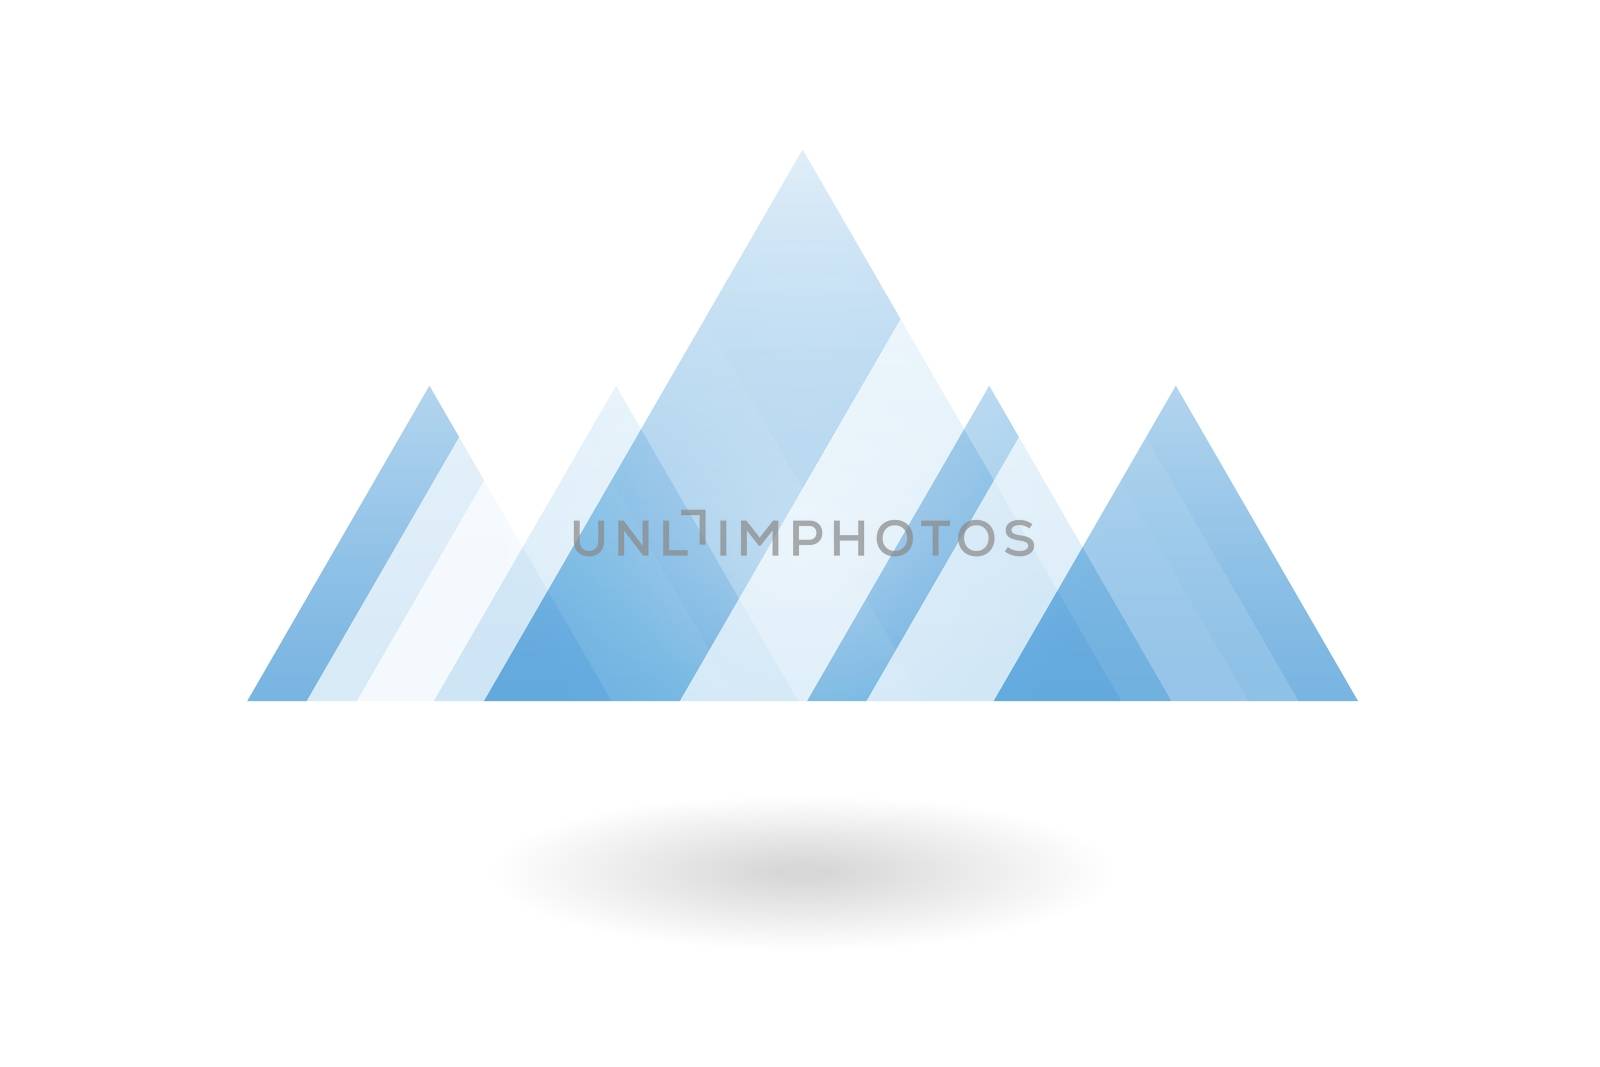 Abstract geometric pattern, blue overlapping triangle mountain logo